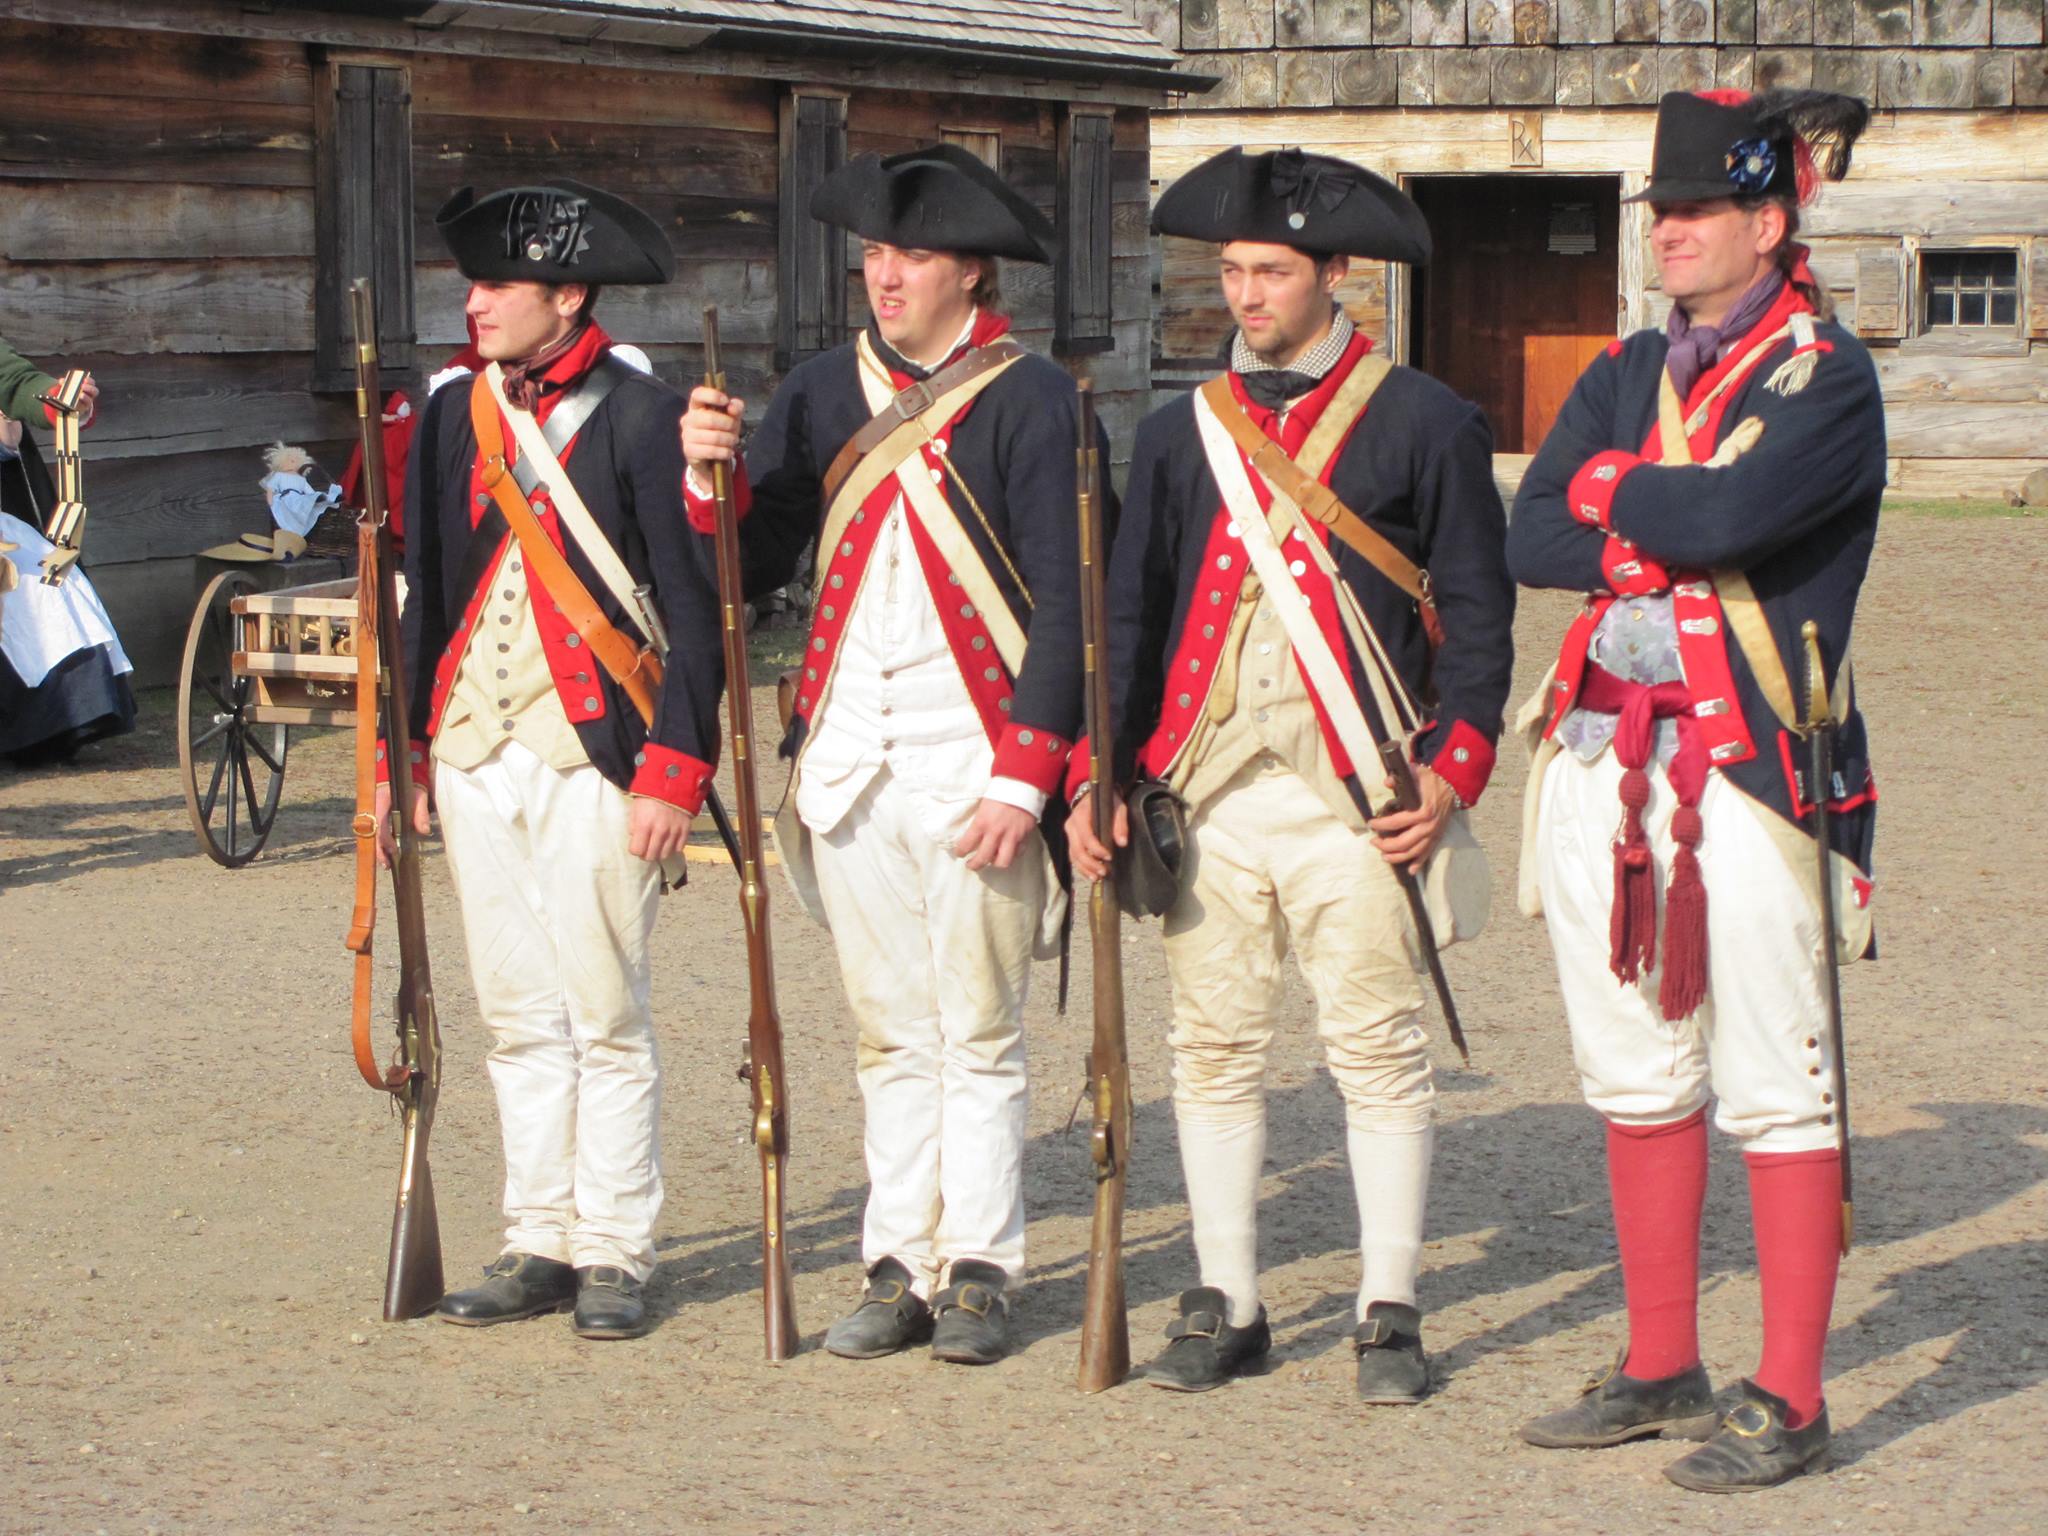 Four Continental Soldiers stand shoulder to shoulder. One has his arms crossed, the other three hold muskets by their sides.